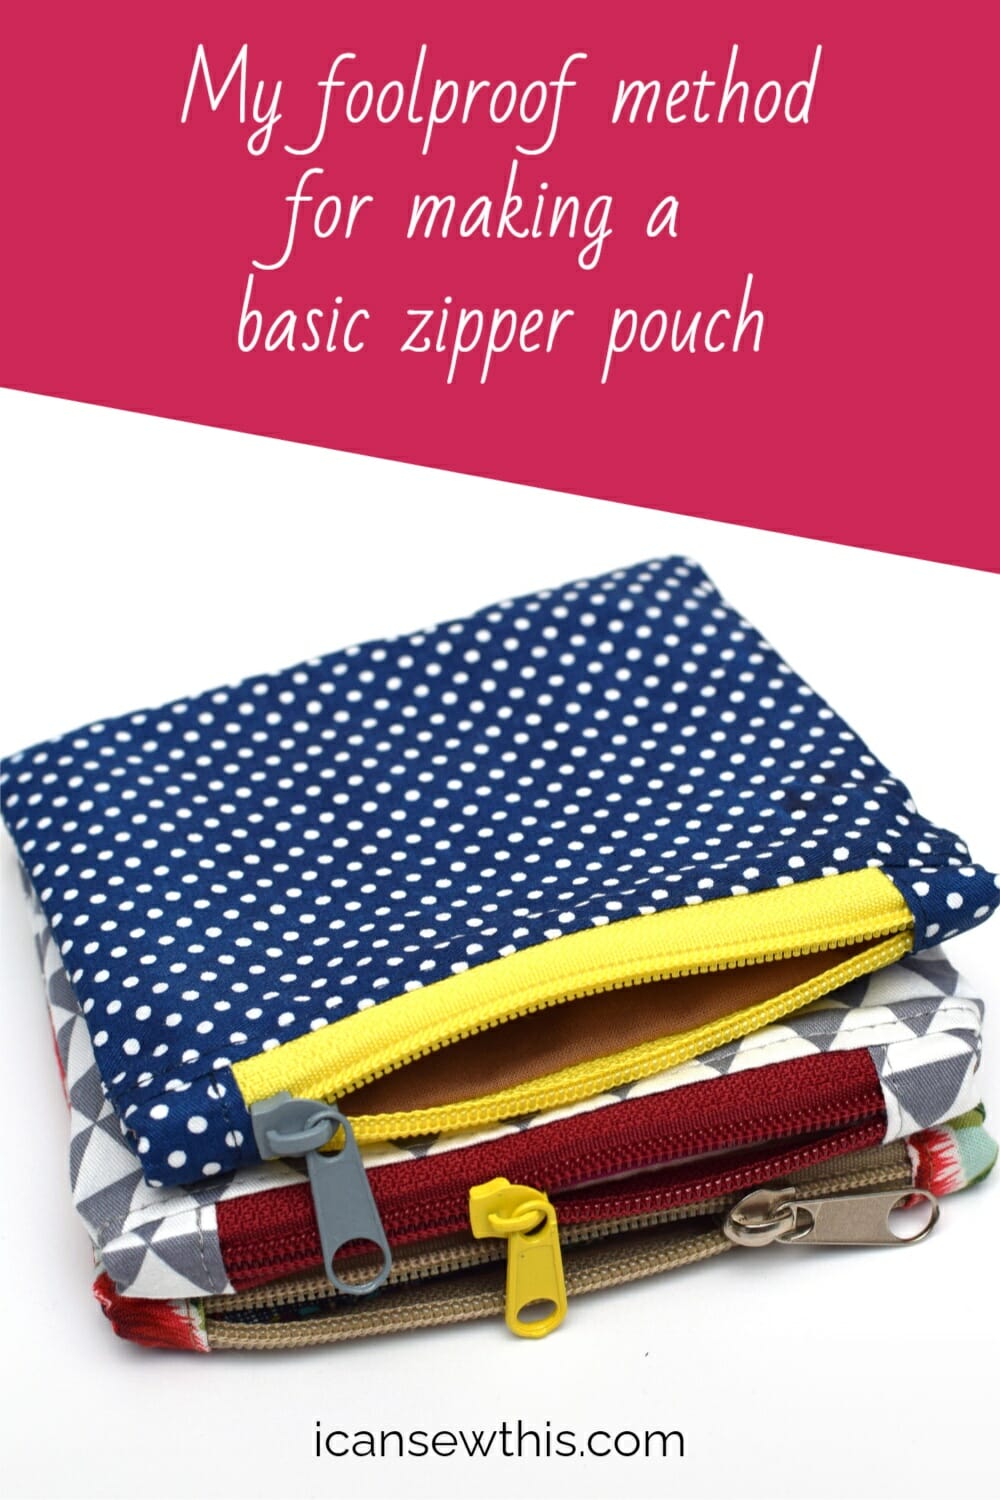 How to Sew a Zipper - Easiest Way for Beginners